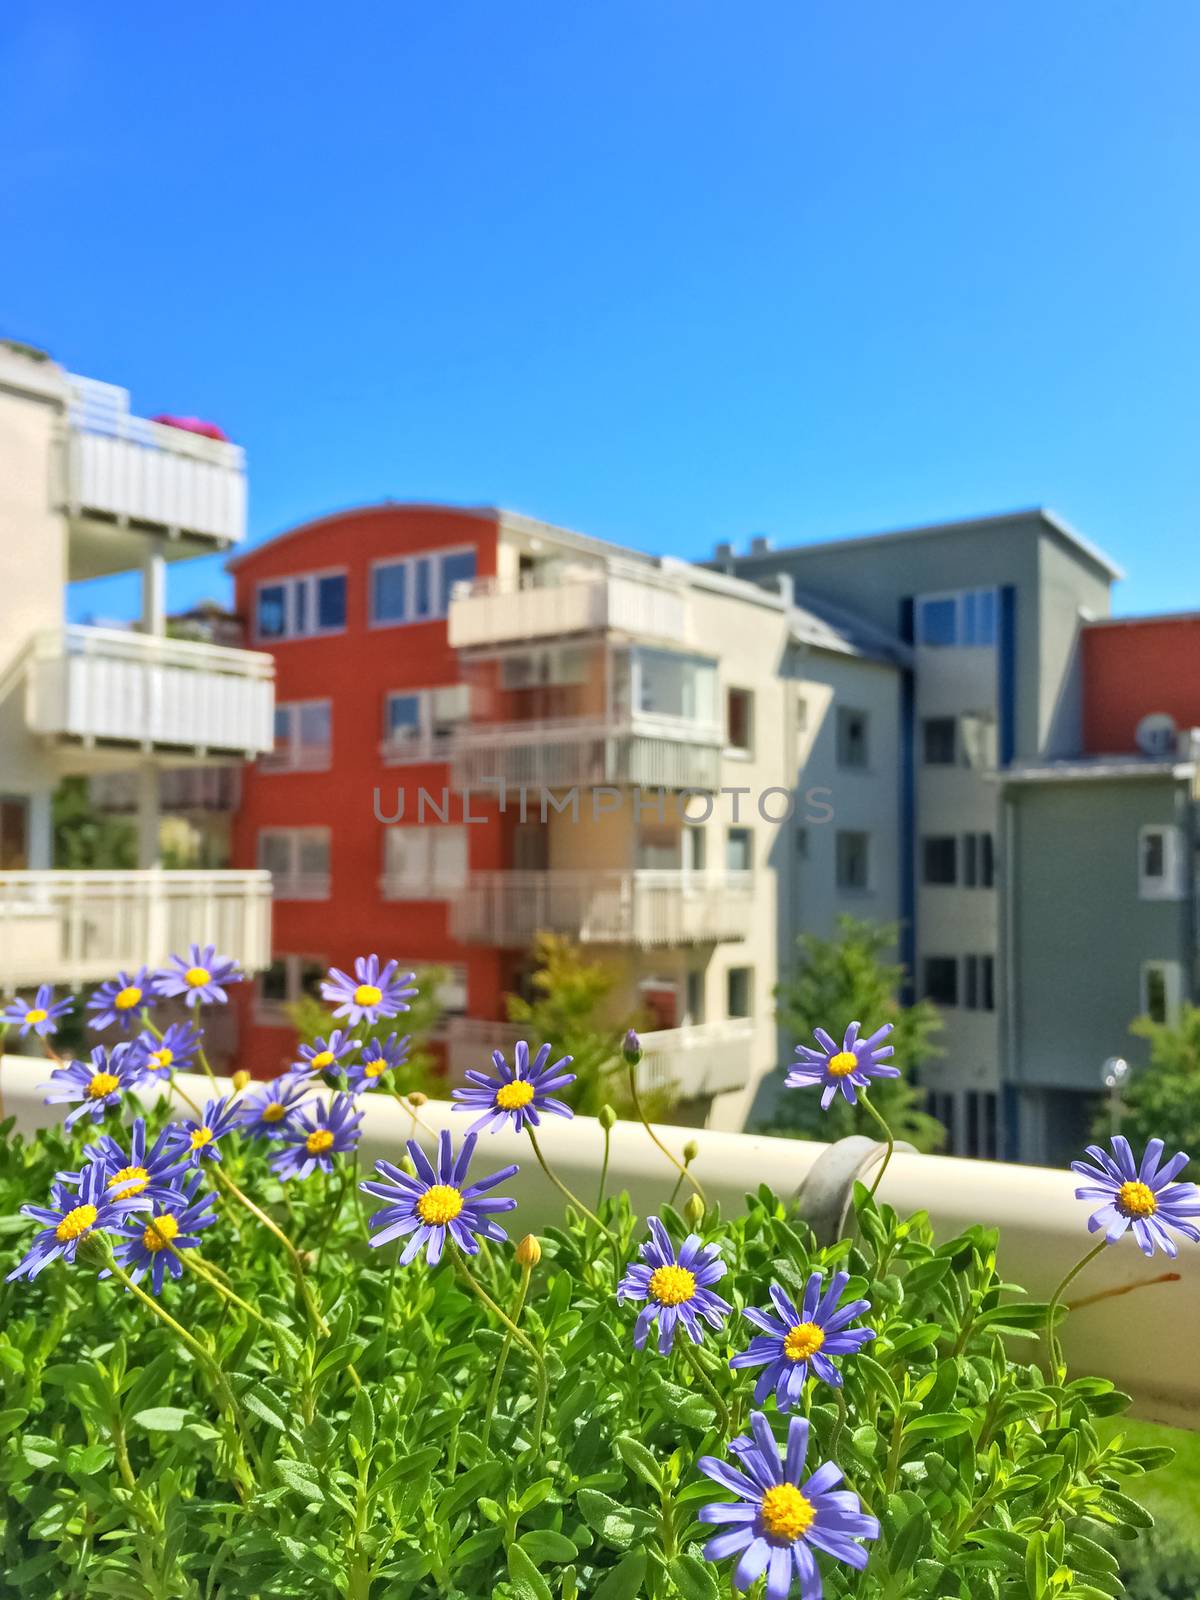 Balcony with blooming blue daises. Modern apartment buildings.